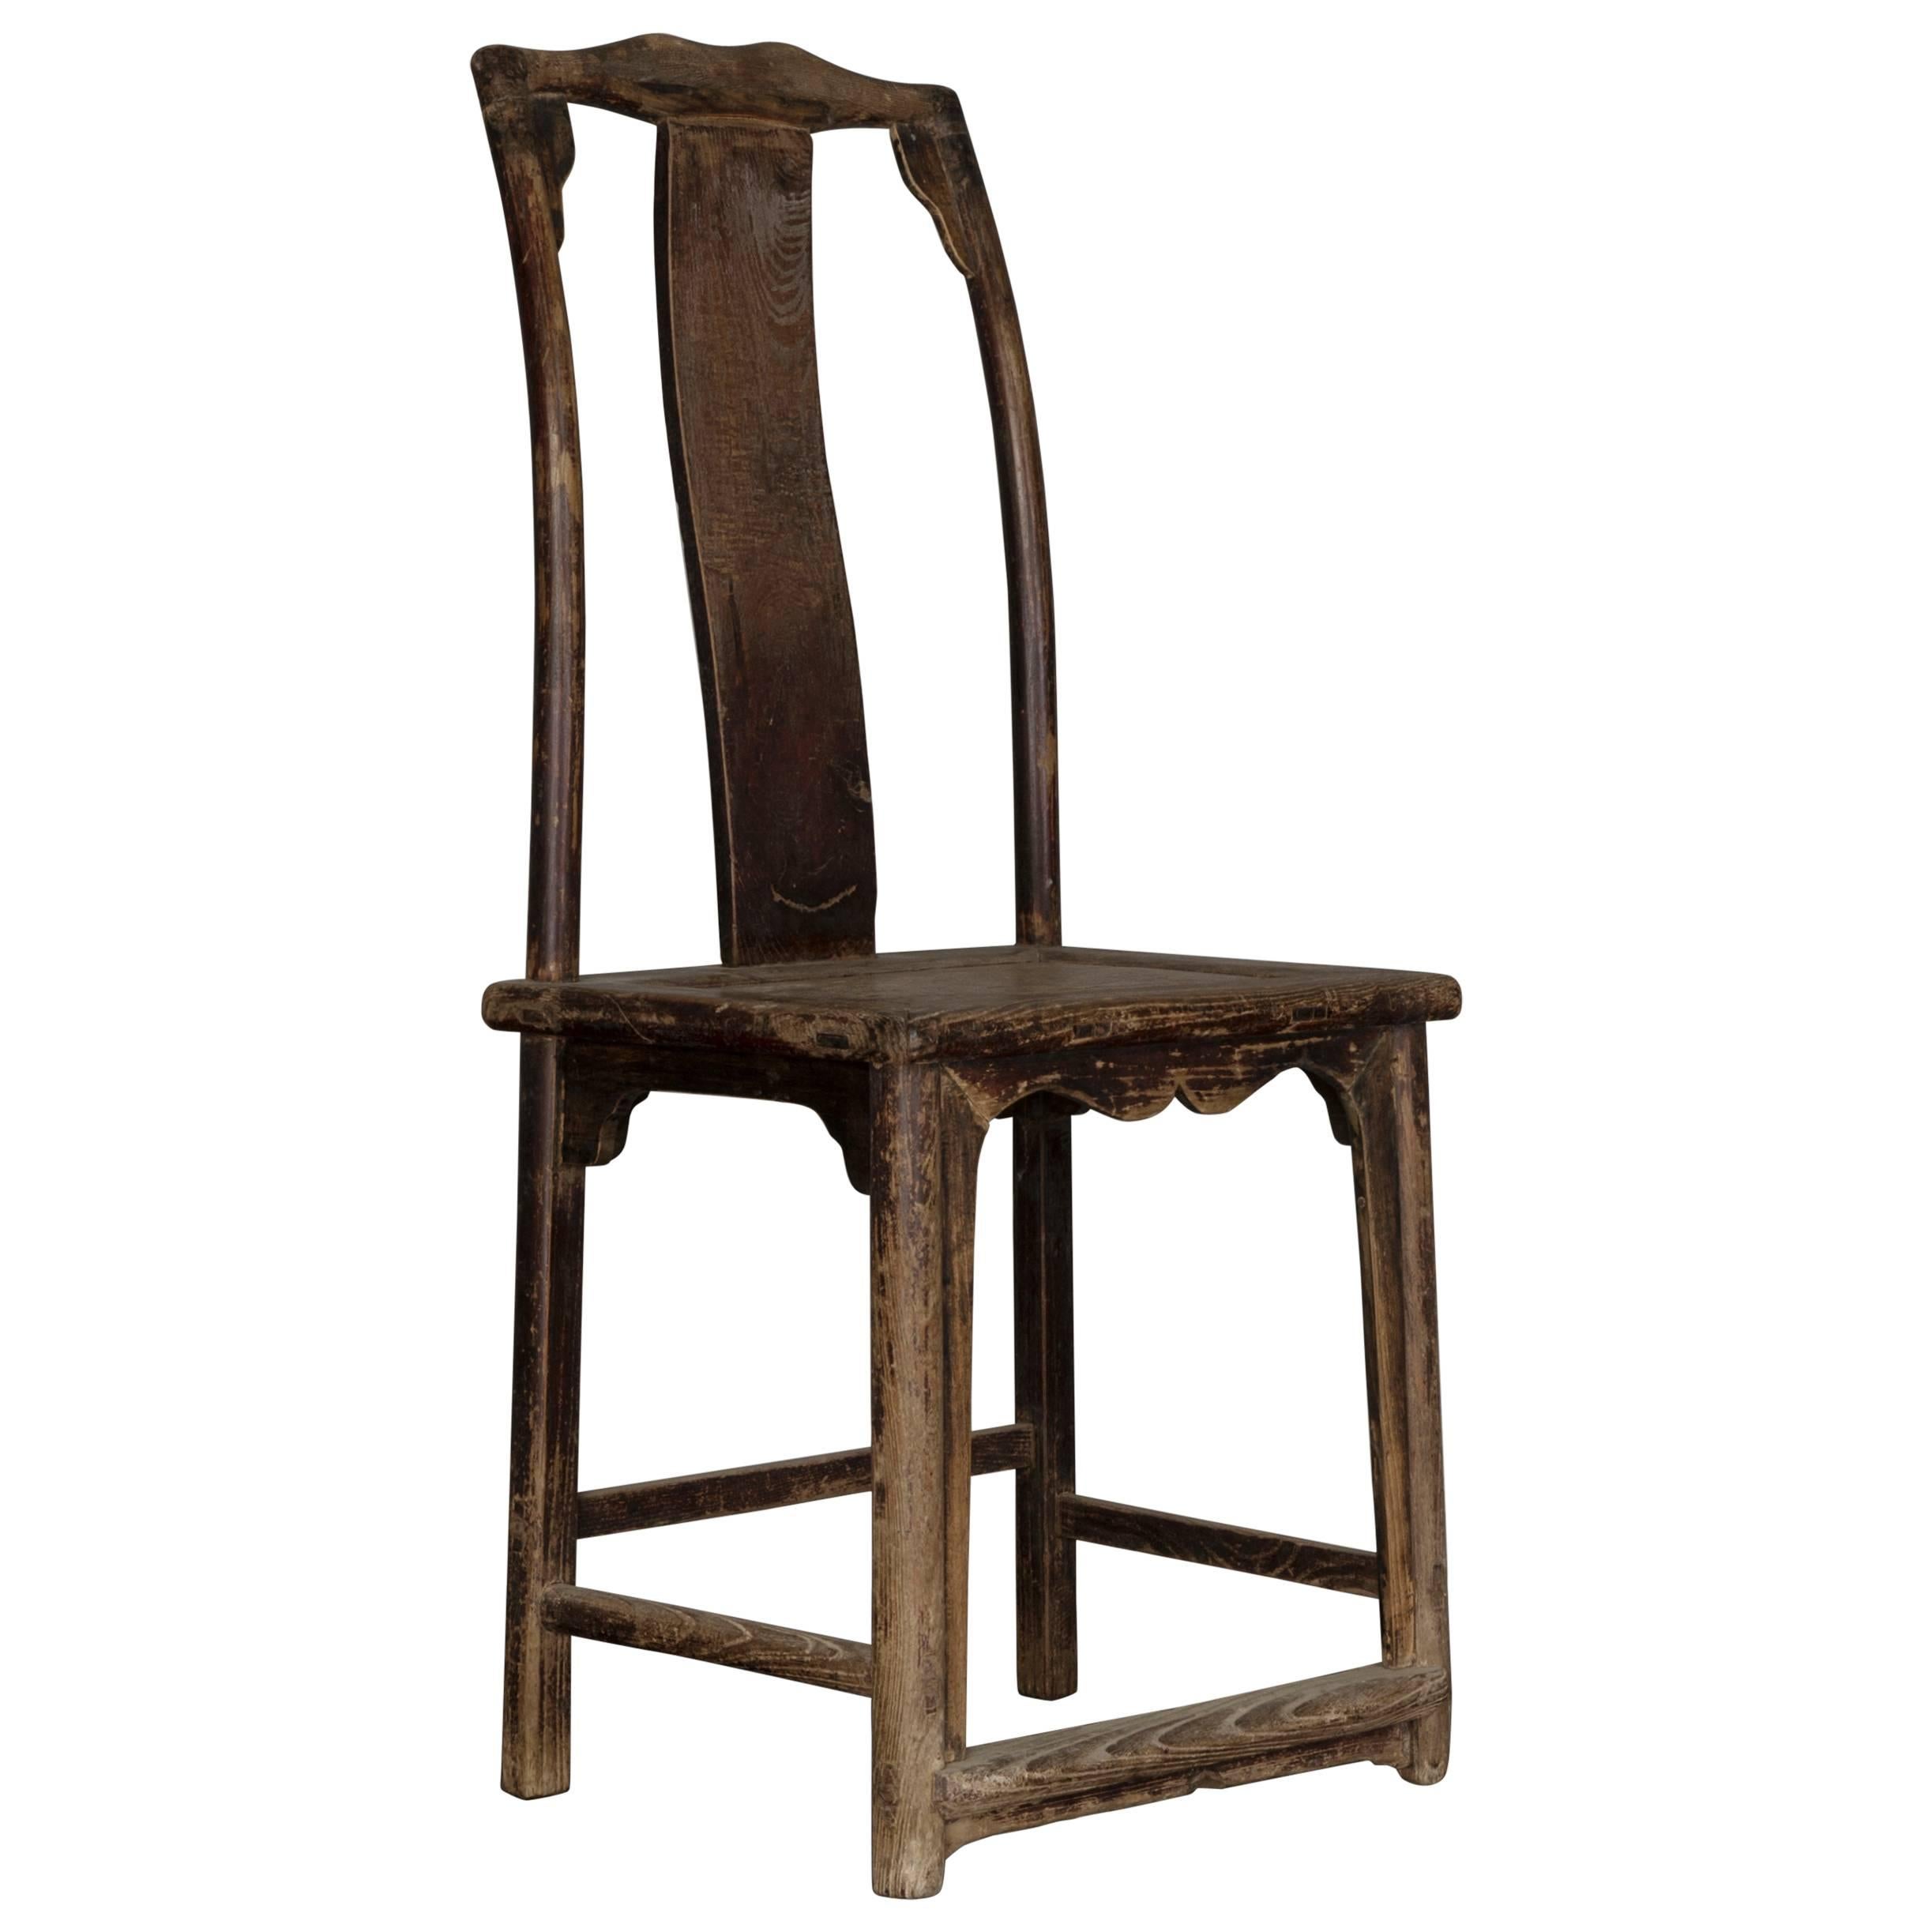 Old Chinese Oak Chair from the 19th Century